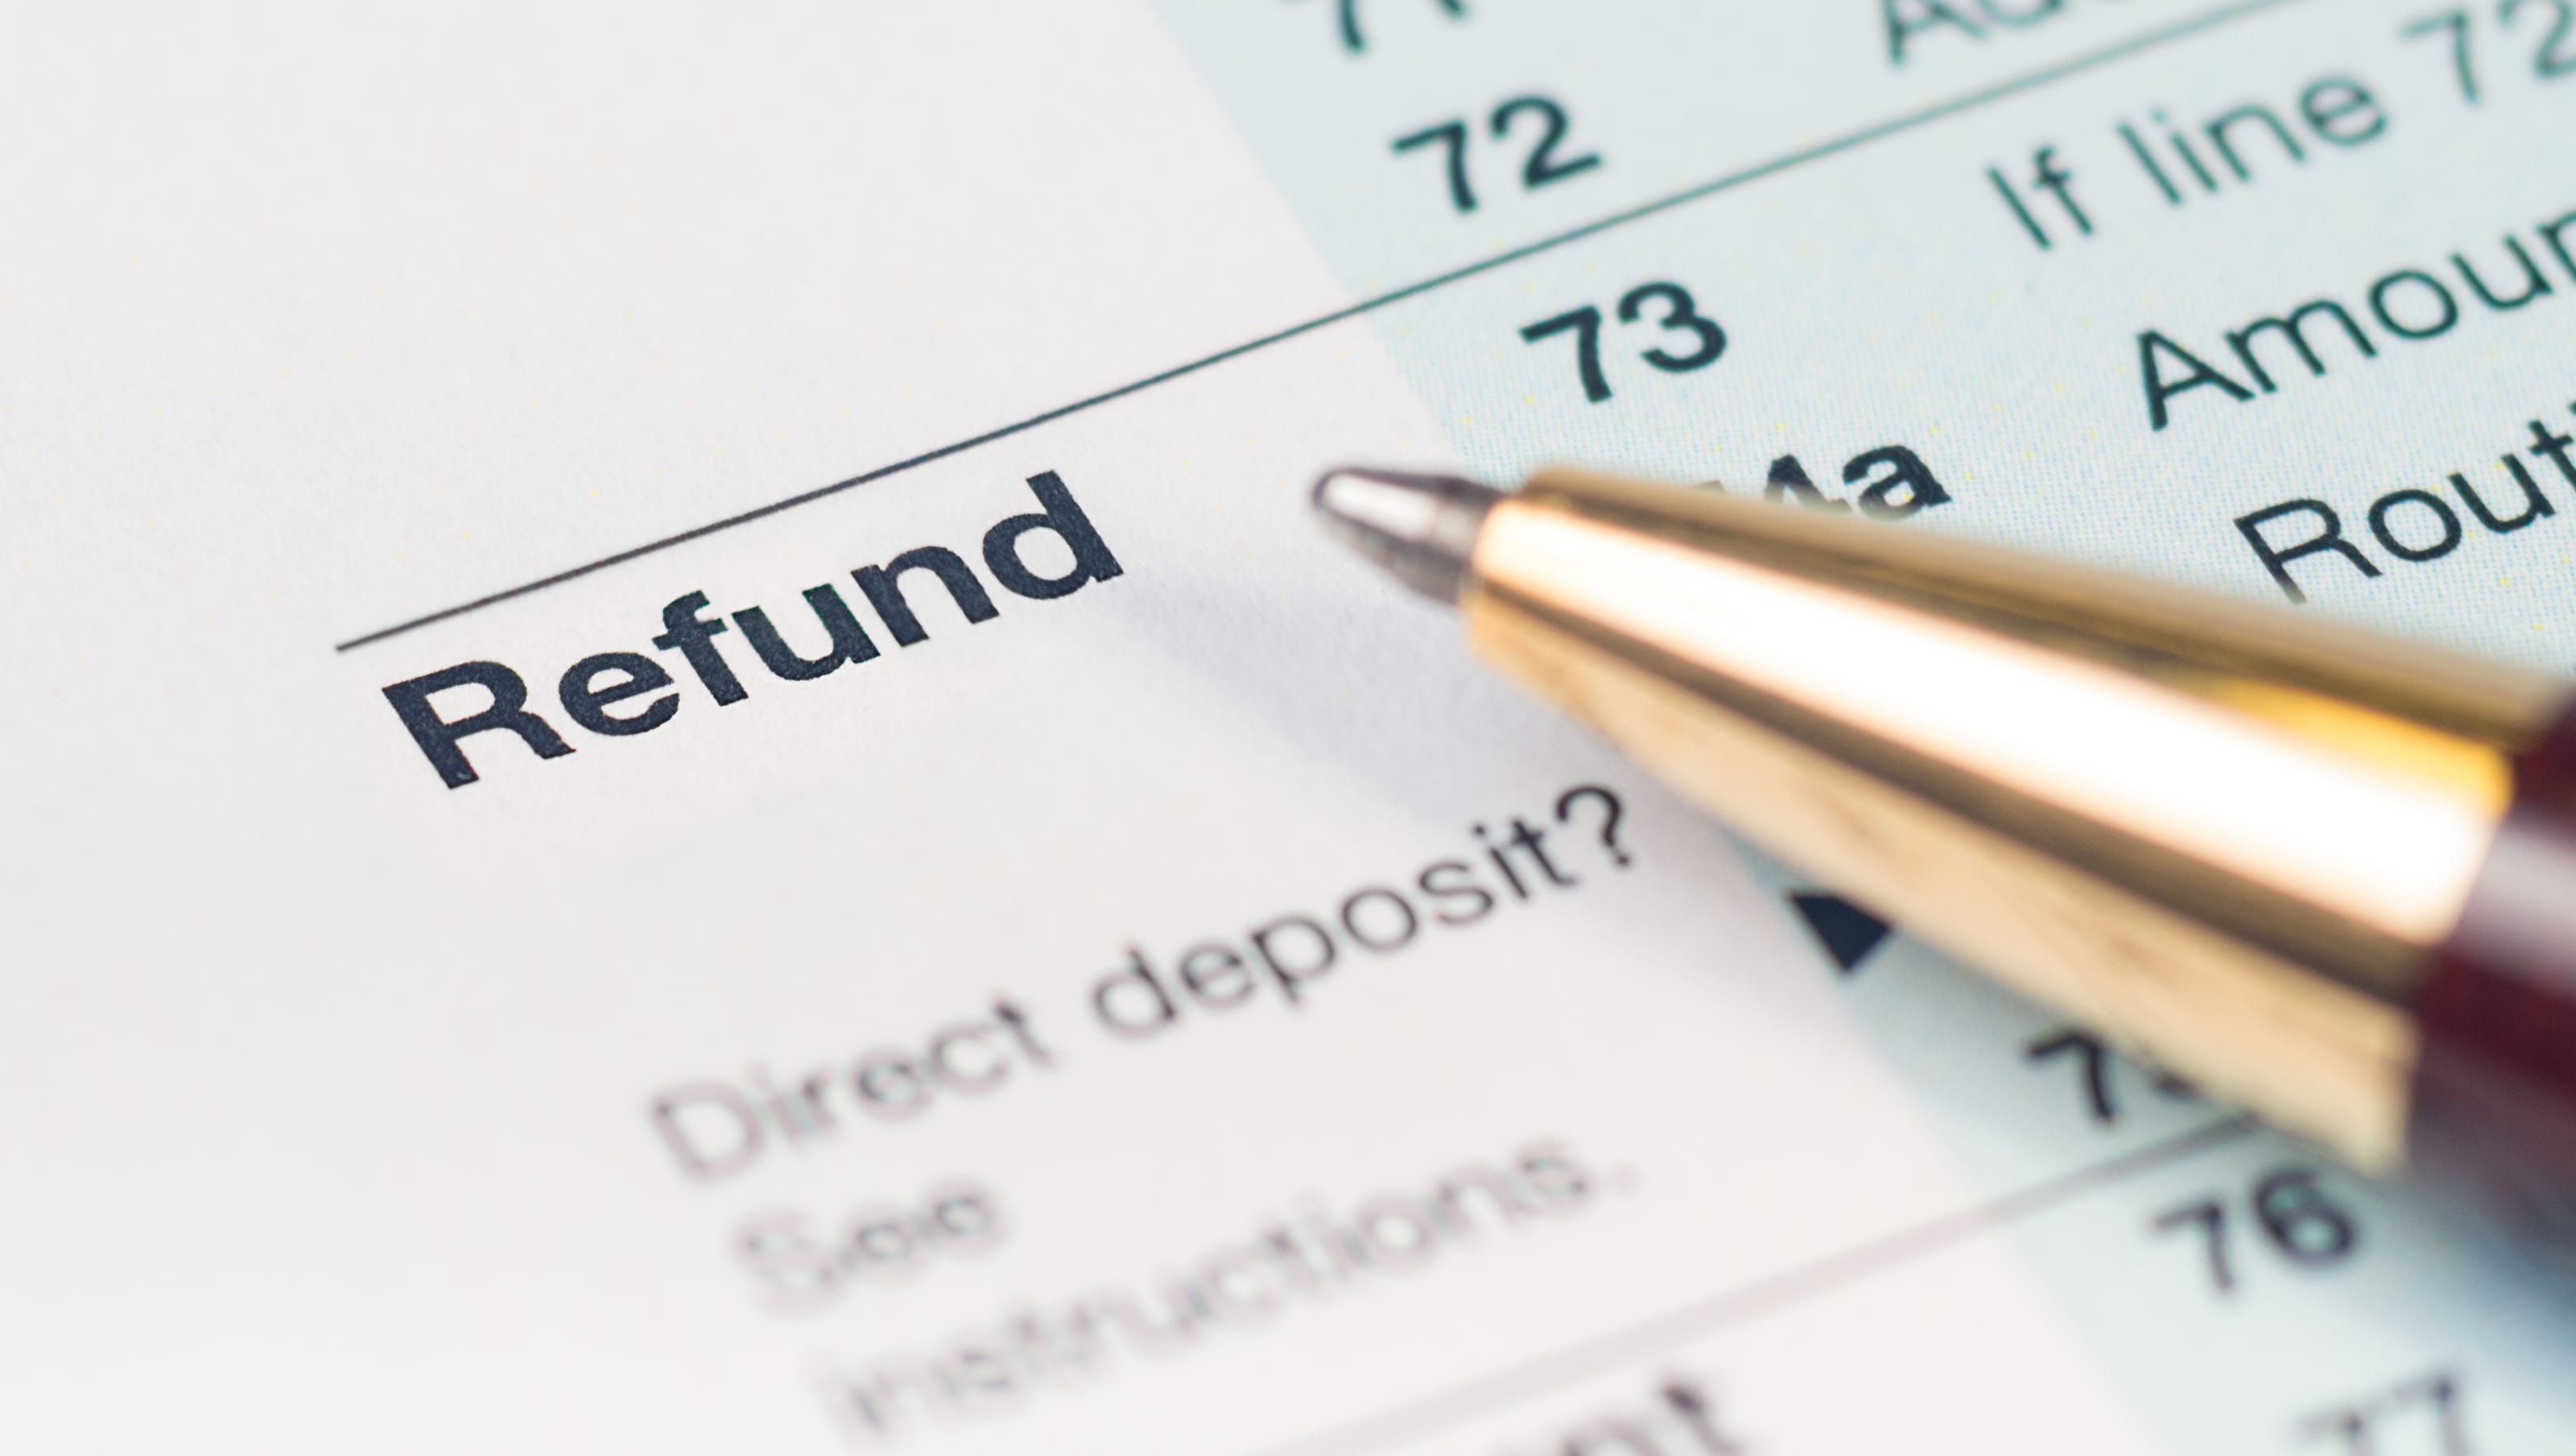 get-the-most-out-of-tax-refund-with-these-tips